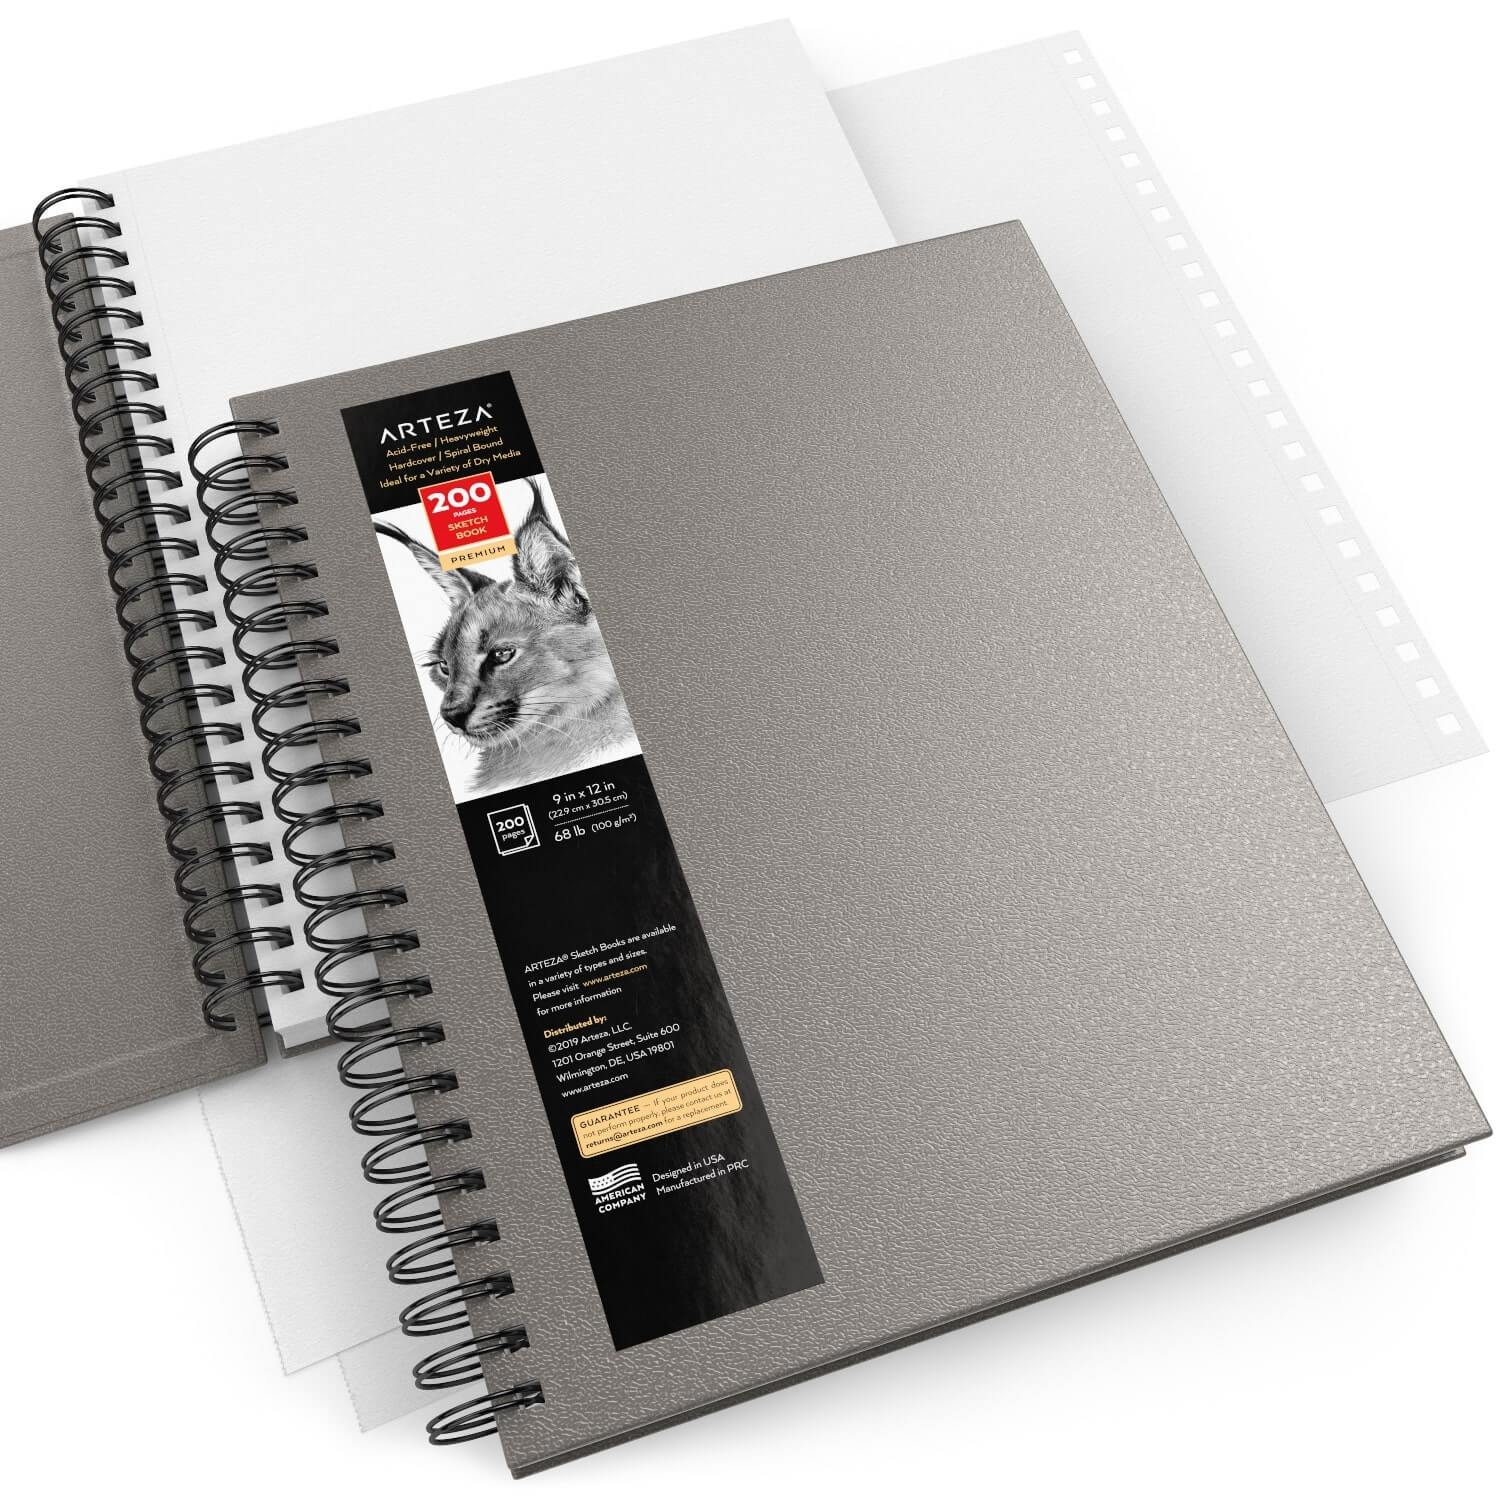 Arteza Sketchbook, Spiral-Bound Hardcover, Black, 9x12, 200 Pages of  Drawing Paper Each - 2 Pack